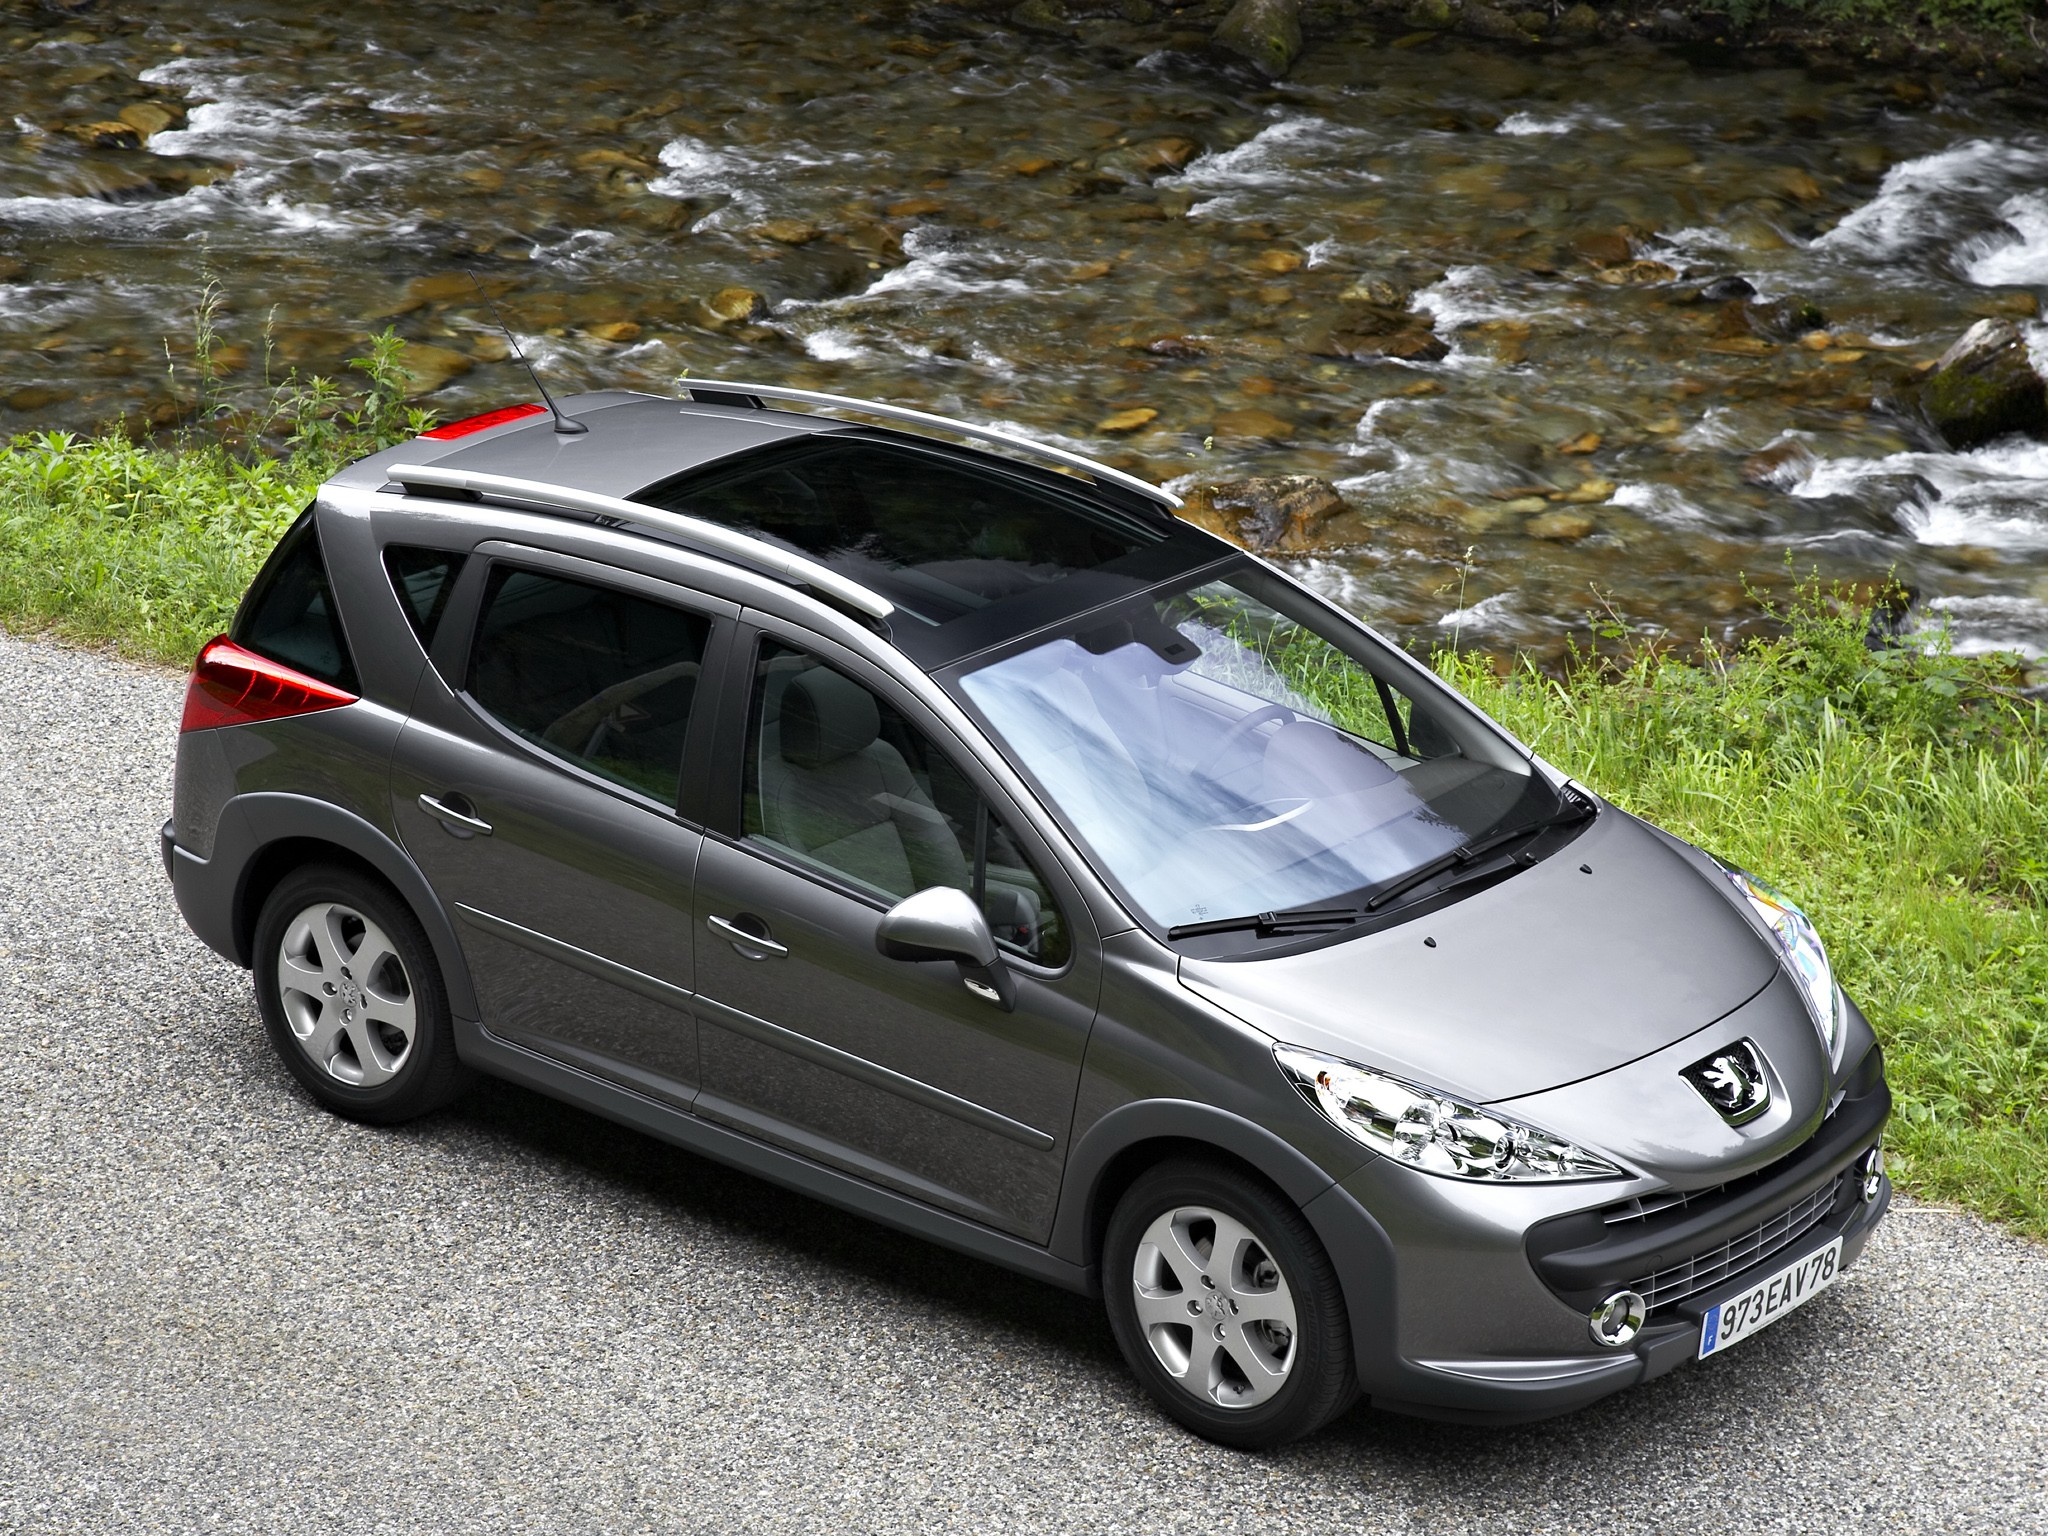 2008 Peugeot 207 HDi Touring Review - Drive